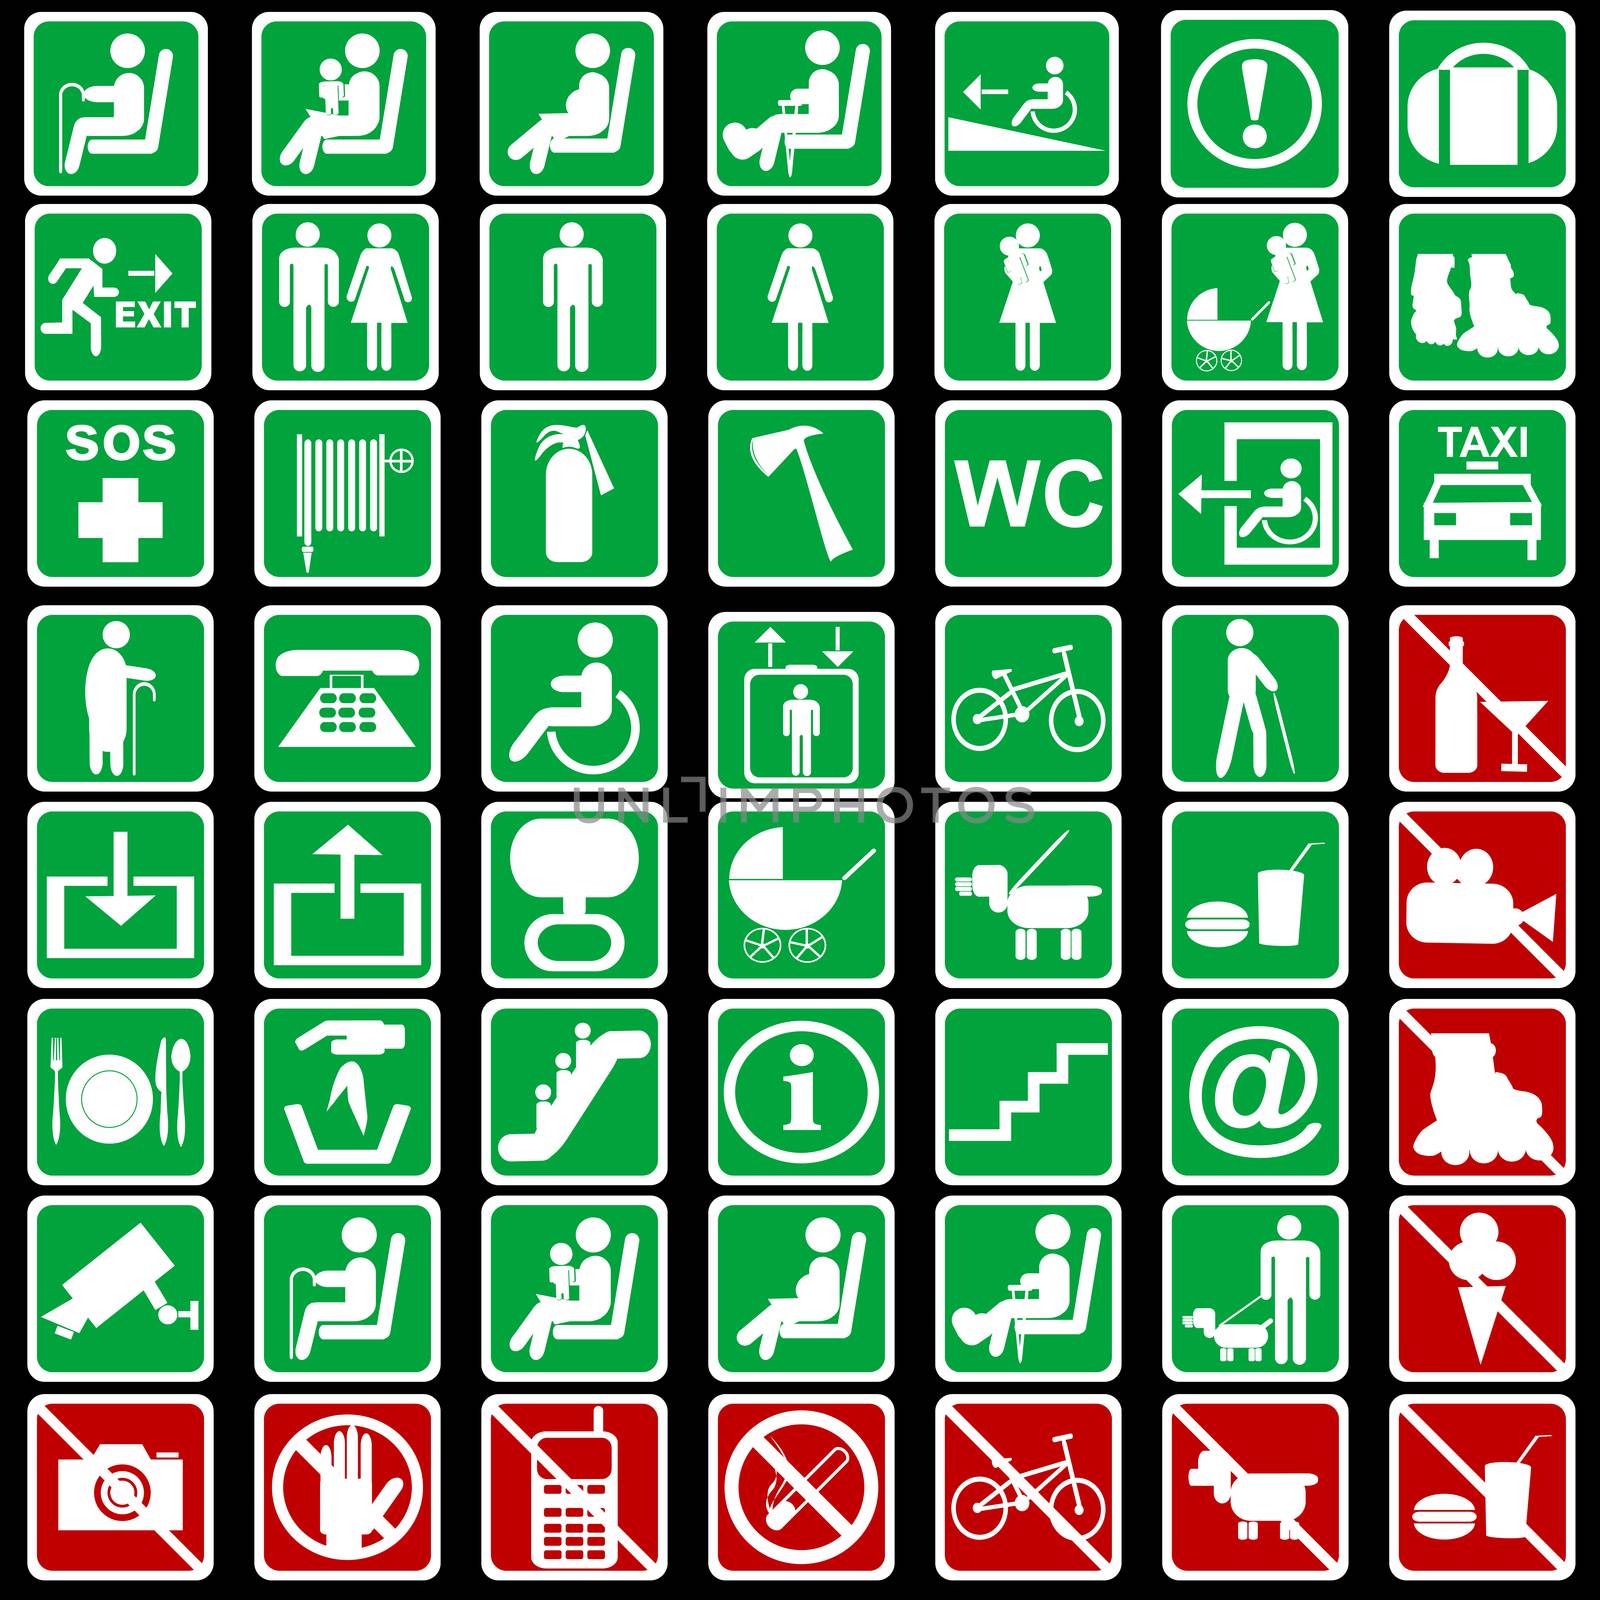 Collection of international signs used in transportation means by hibrida13